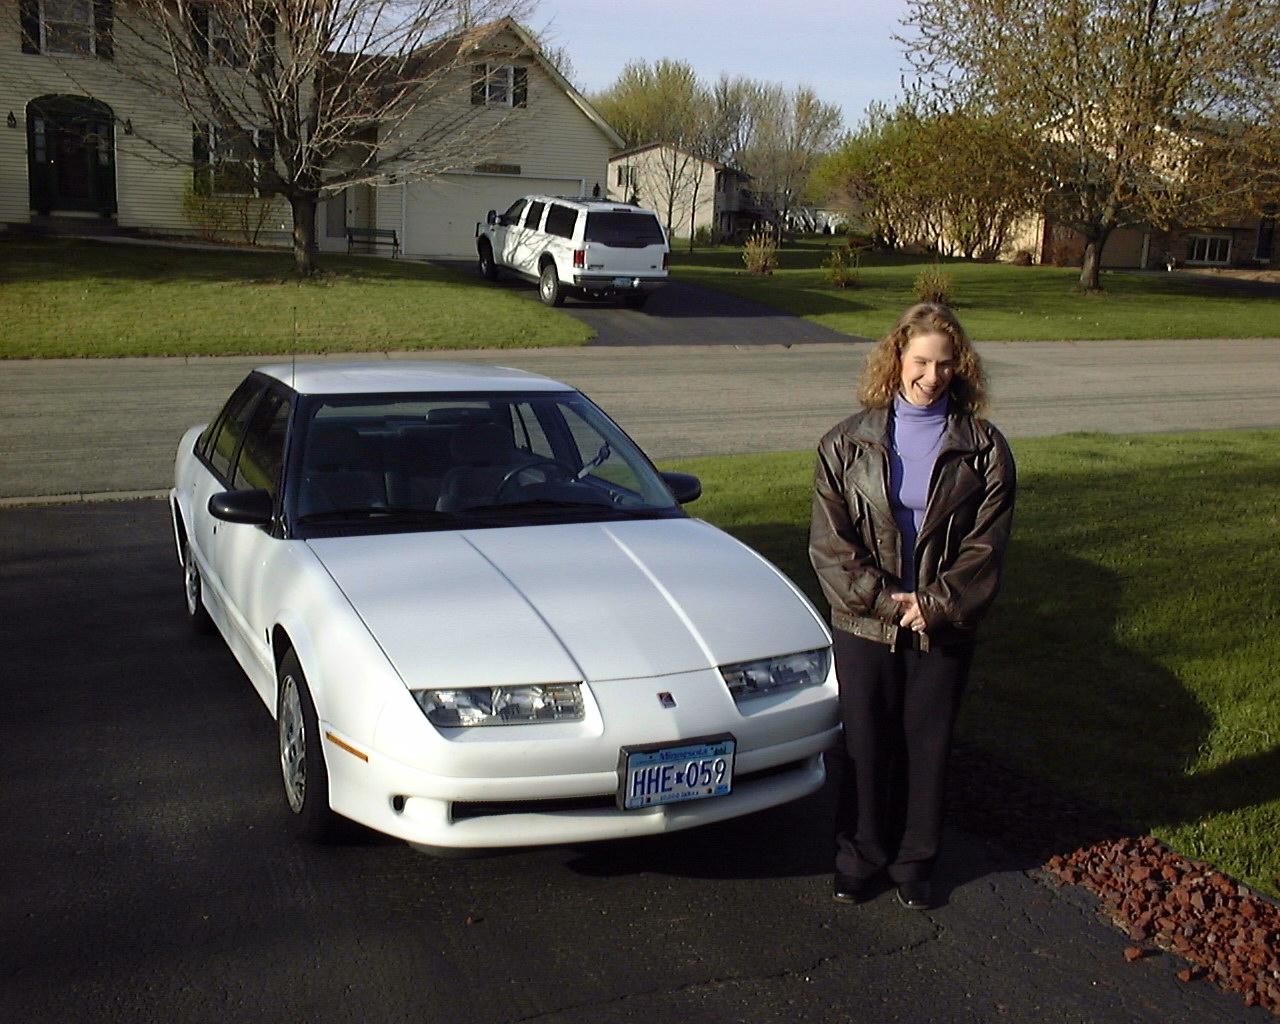 Cathy's old Saturn
We sold our Saturn in May, 2003.  This was originally Cathy's car before we were married, so she posed with it on the morning it was sold.
